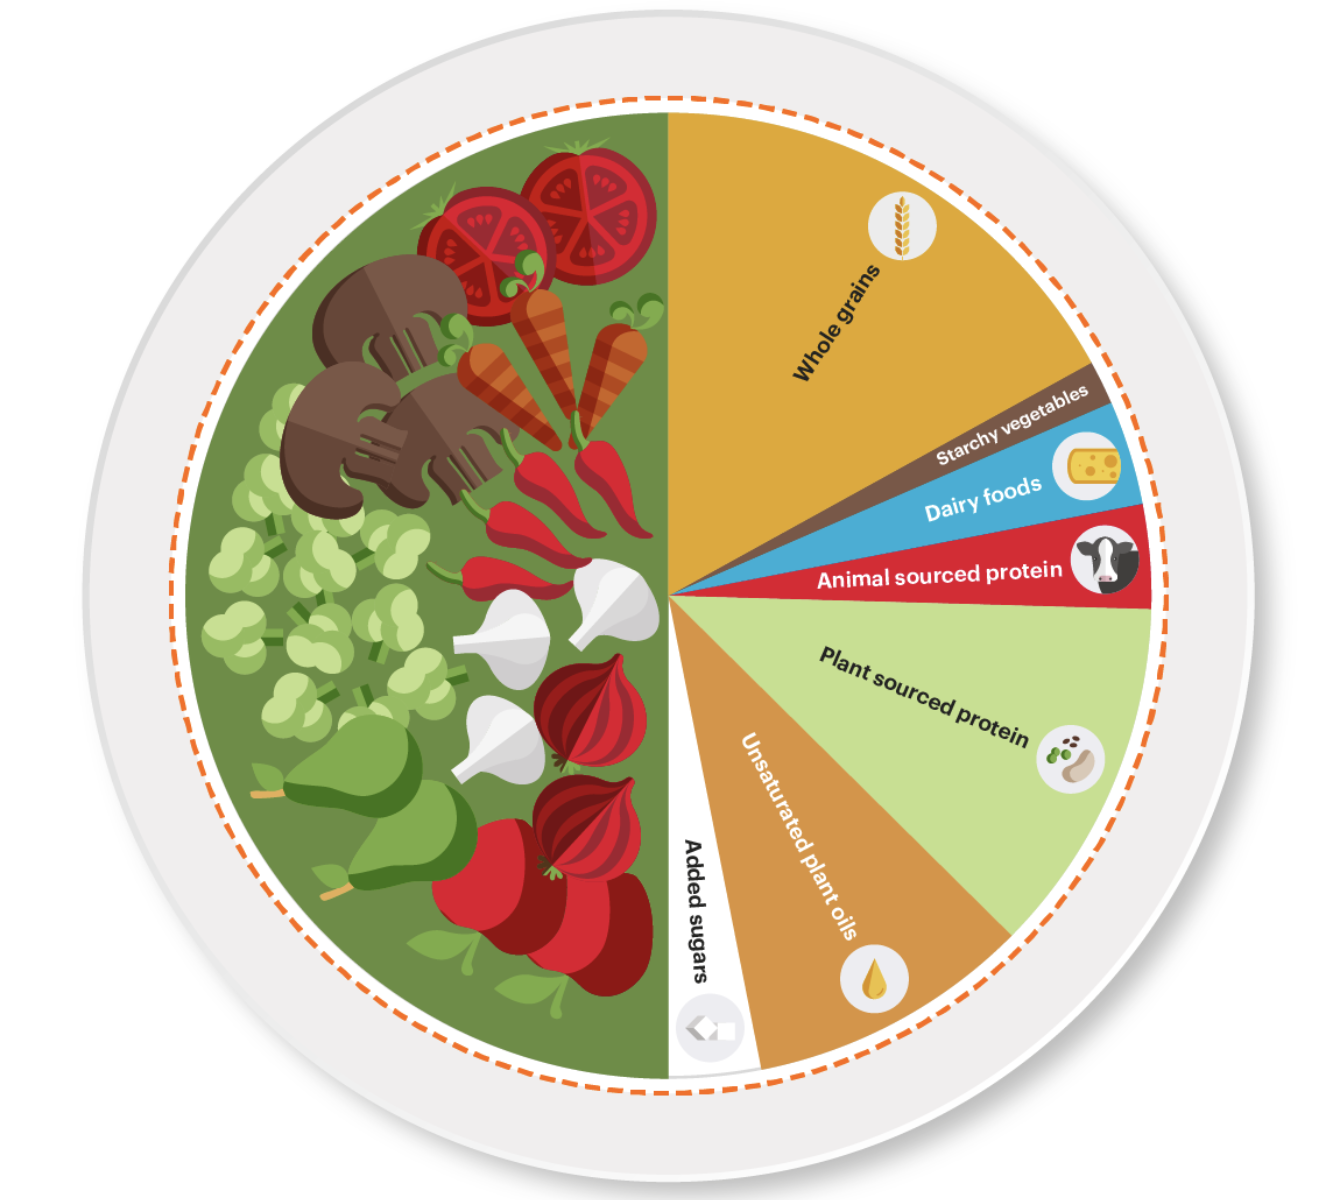 The Planetary Health Diet Image